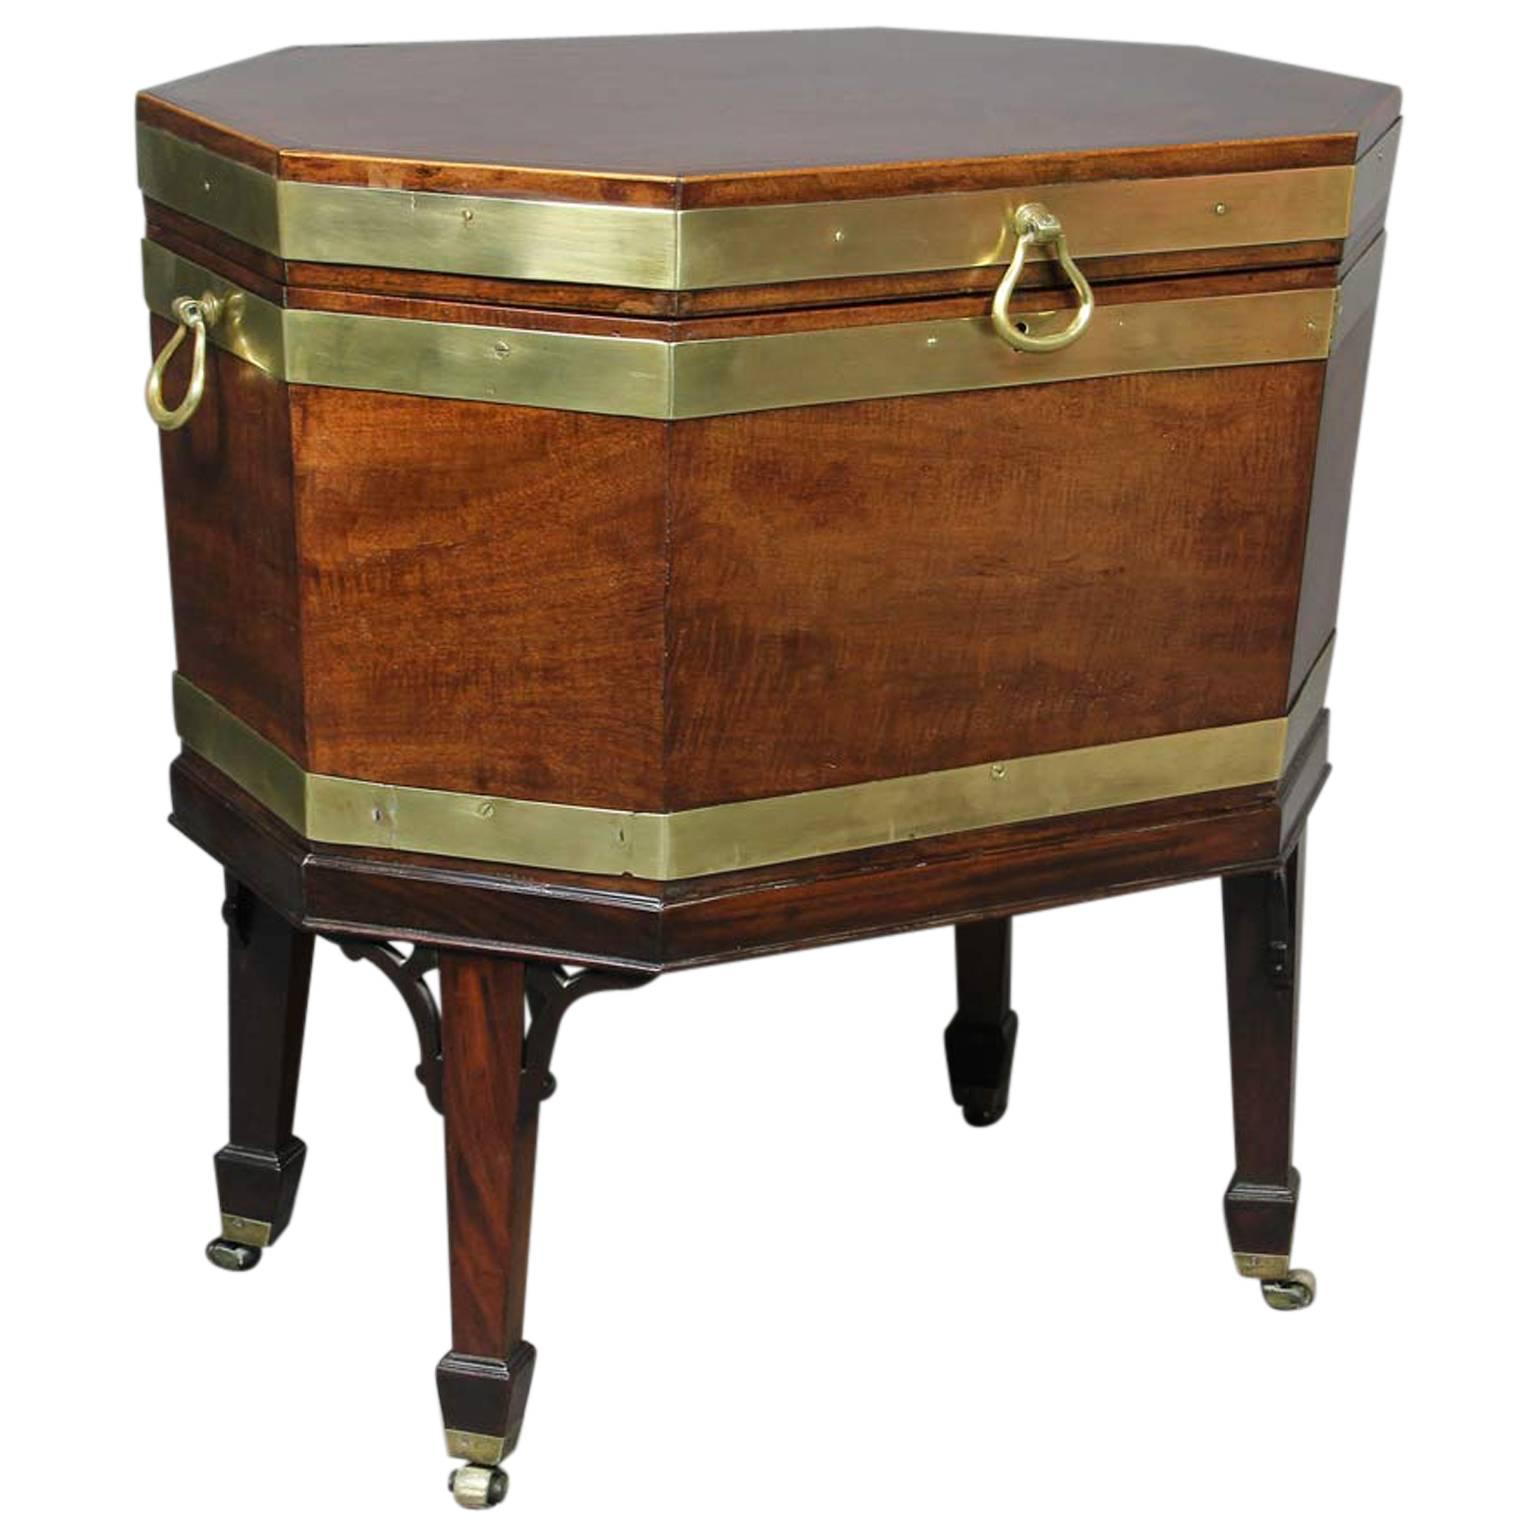 George III Mahogany and Brass Banded Cellerette